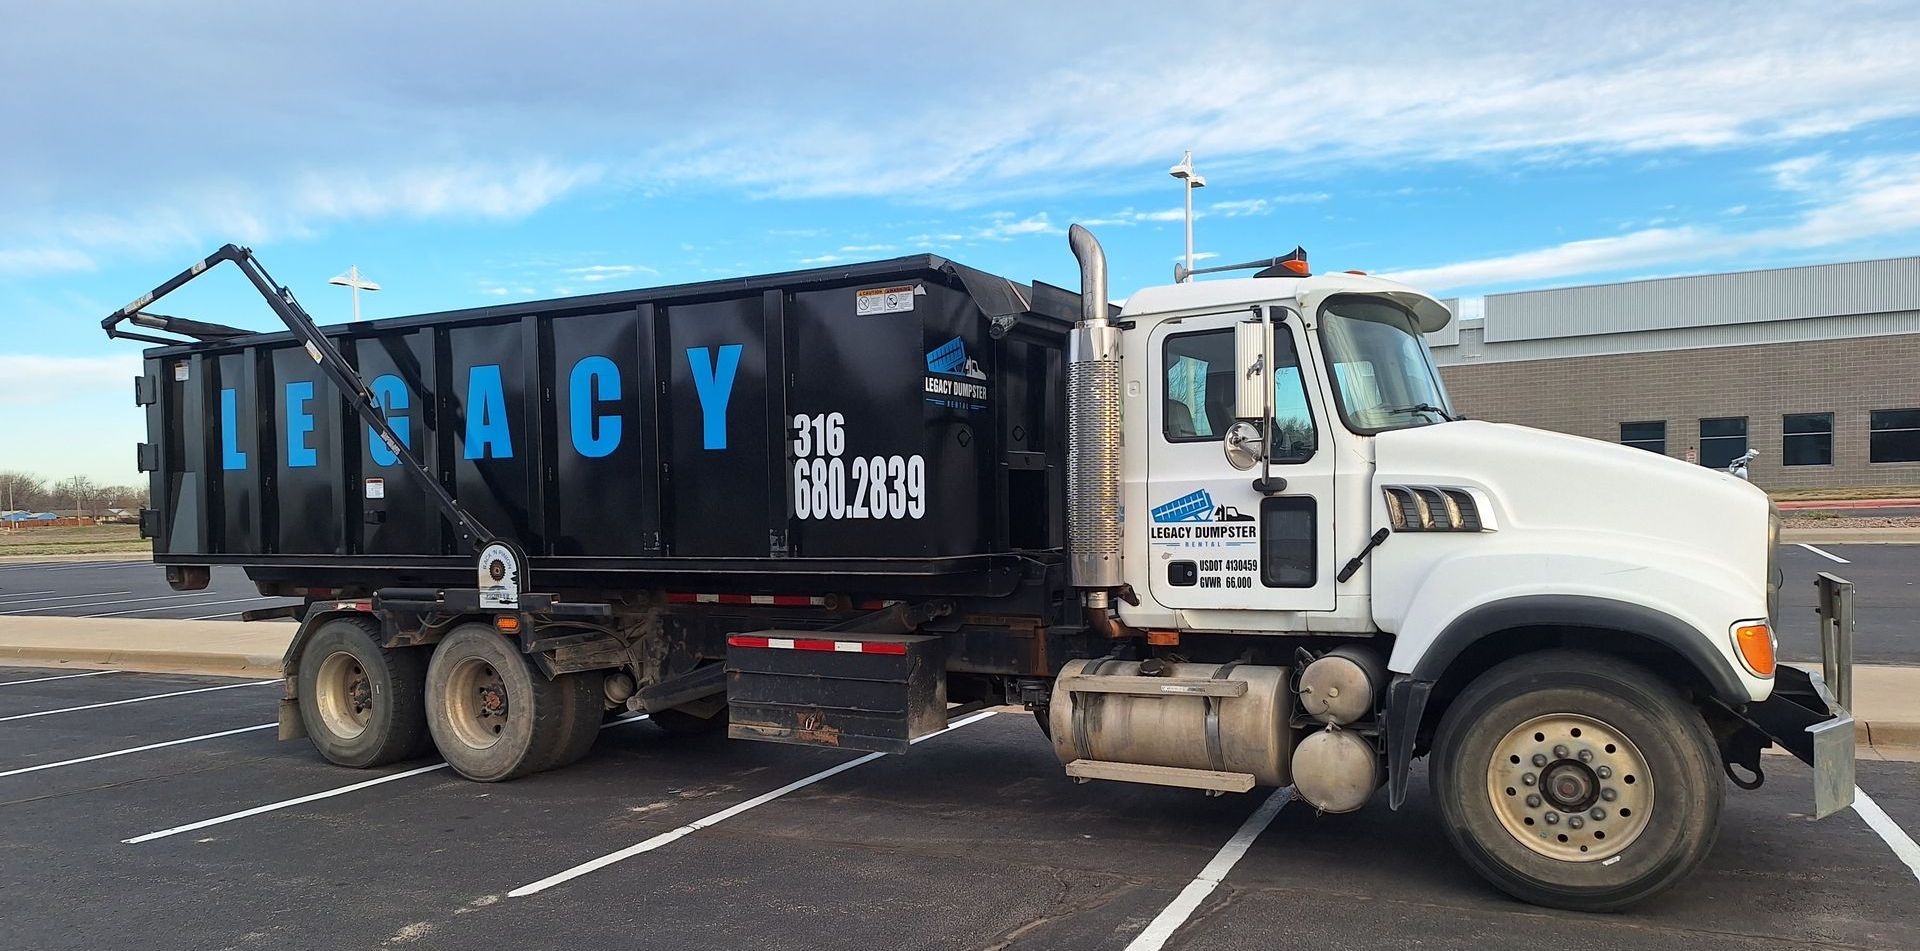 A dump truck is parked in a parking lot with a 40 yard dumpster on the back in wichita